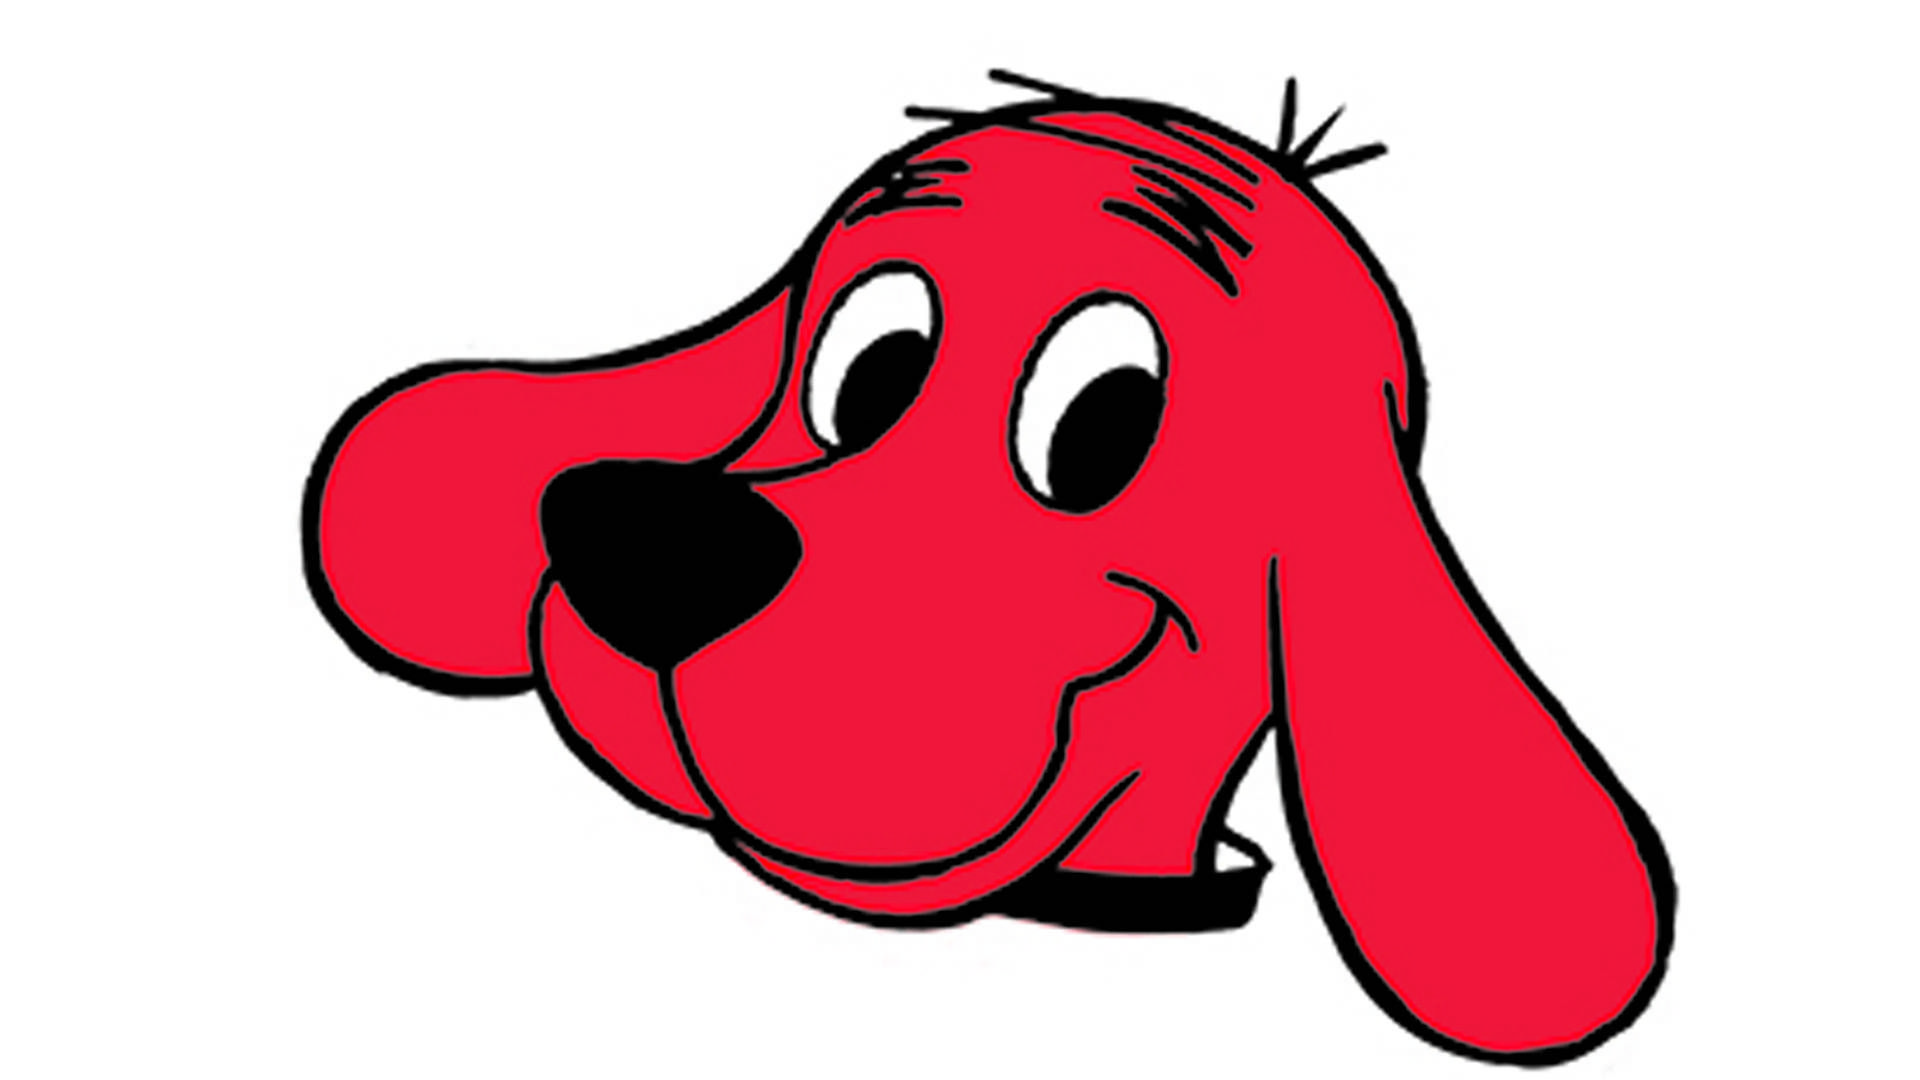 Clifford the Big Red Dog will pounce into the area